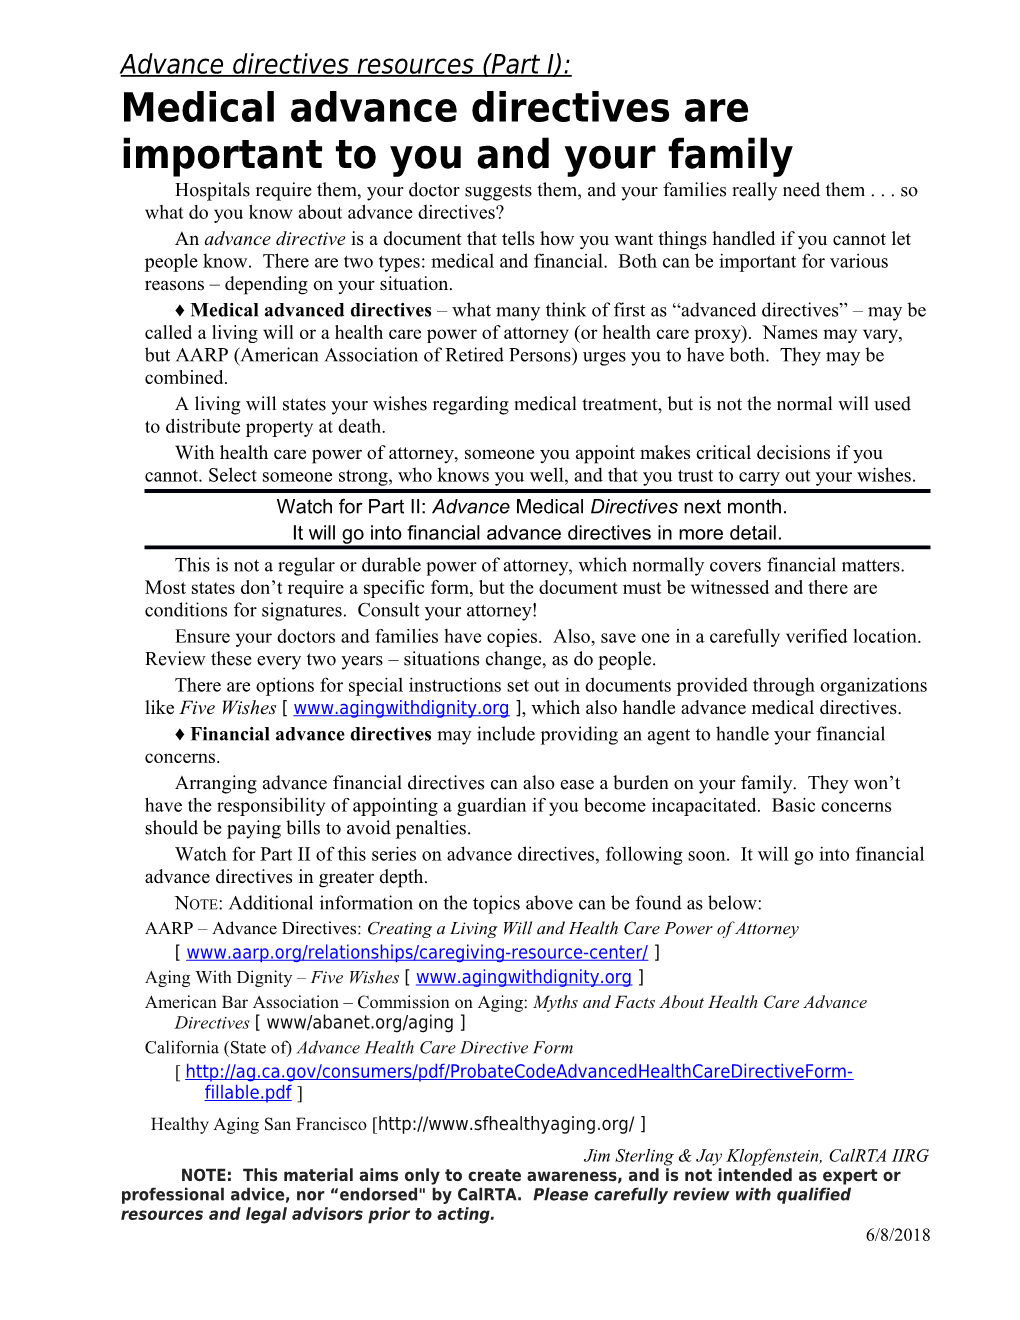 Medical Advance Directives Are